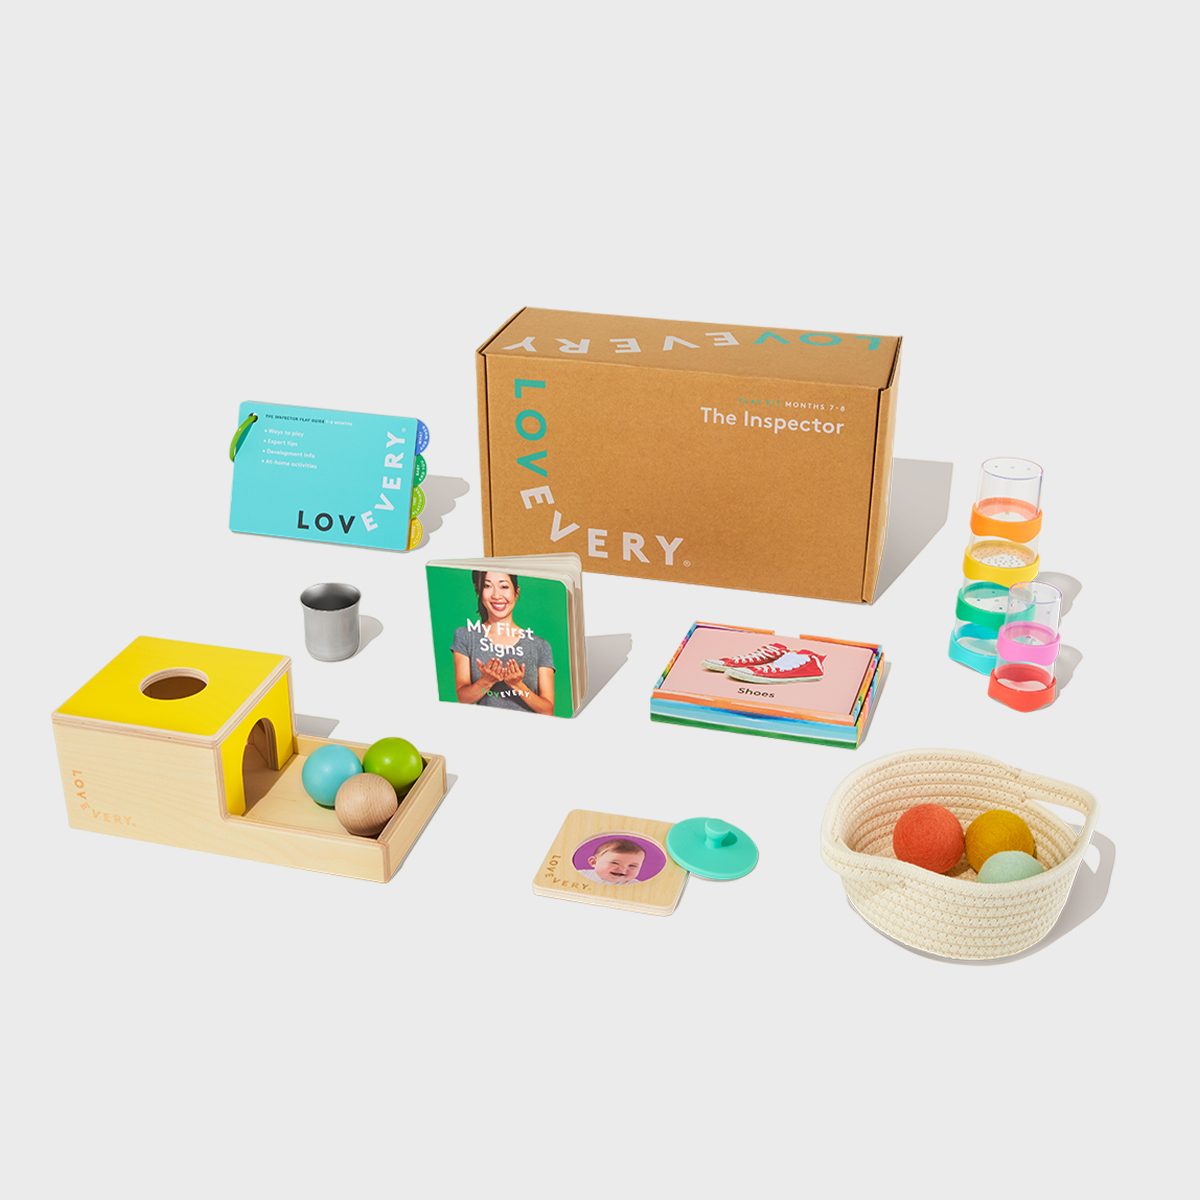 <p>New parents often find themselves inundated with tons of adorable and thoughtful baby gifts. But they only use so many onesies and stuffies. This <a href="https://lovevery.com/products/the-play-kits" rel="noopener noreferrer">play kit subscription</a> is a useful gift that parents will appreciate. Each box is filled with <a href="https://www.rd.com/list/toys-worth-thousands/">beautiful toys</a>—you won't find any toys with loud noises or flashing lights in these kits—that are developmentally appropriate for babies. There's even one for newborns. Each box also comes with a colorful book that contains helpful tips about what to introduce to baby and when, ways to play and other helpful expert tips and suggestions for at-home activities.</p> <p>Gift a subscription and a new play kit will arrive every two to three months or just send one play kit. Kits ship for free and cancel the subscription at any time. And while you're at it, here are even more <a href="https://www.rd.com/article/best-subscription-boxes/" rel="noopener noreferrer">subscription boxes</a> for everyone else on the list.</p> <p class="listicle-page__cta-button-shop"><a class="shop-btn" href="https://lovevery.com/products/the-play-kits">Shop Now</a></p>